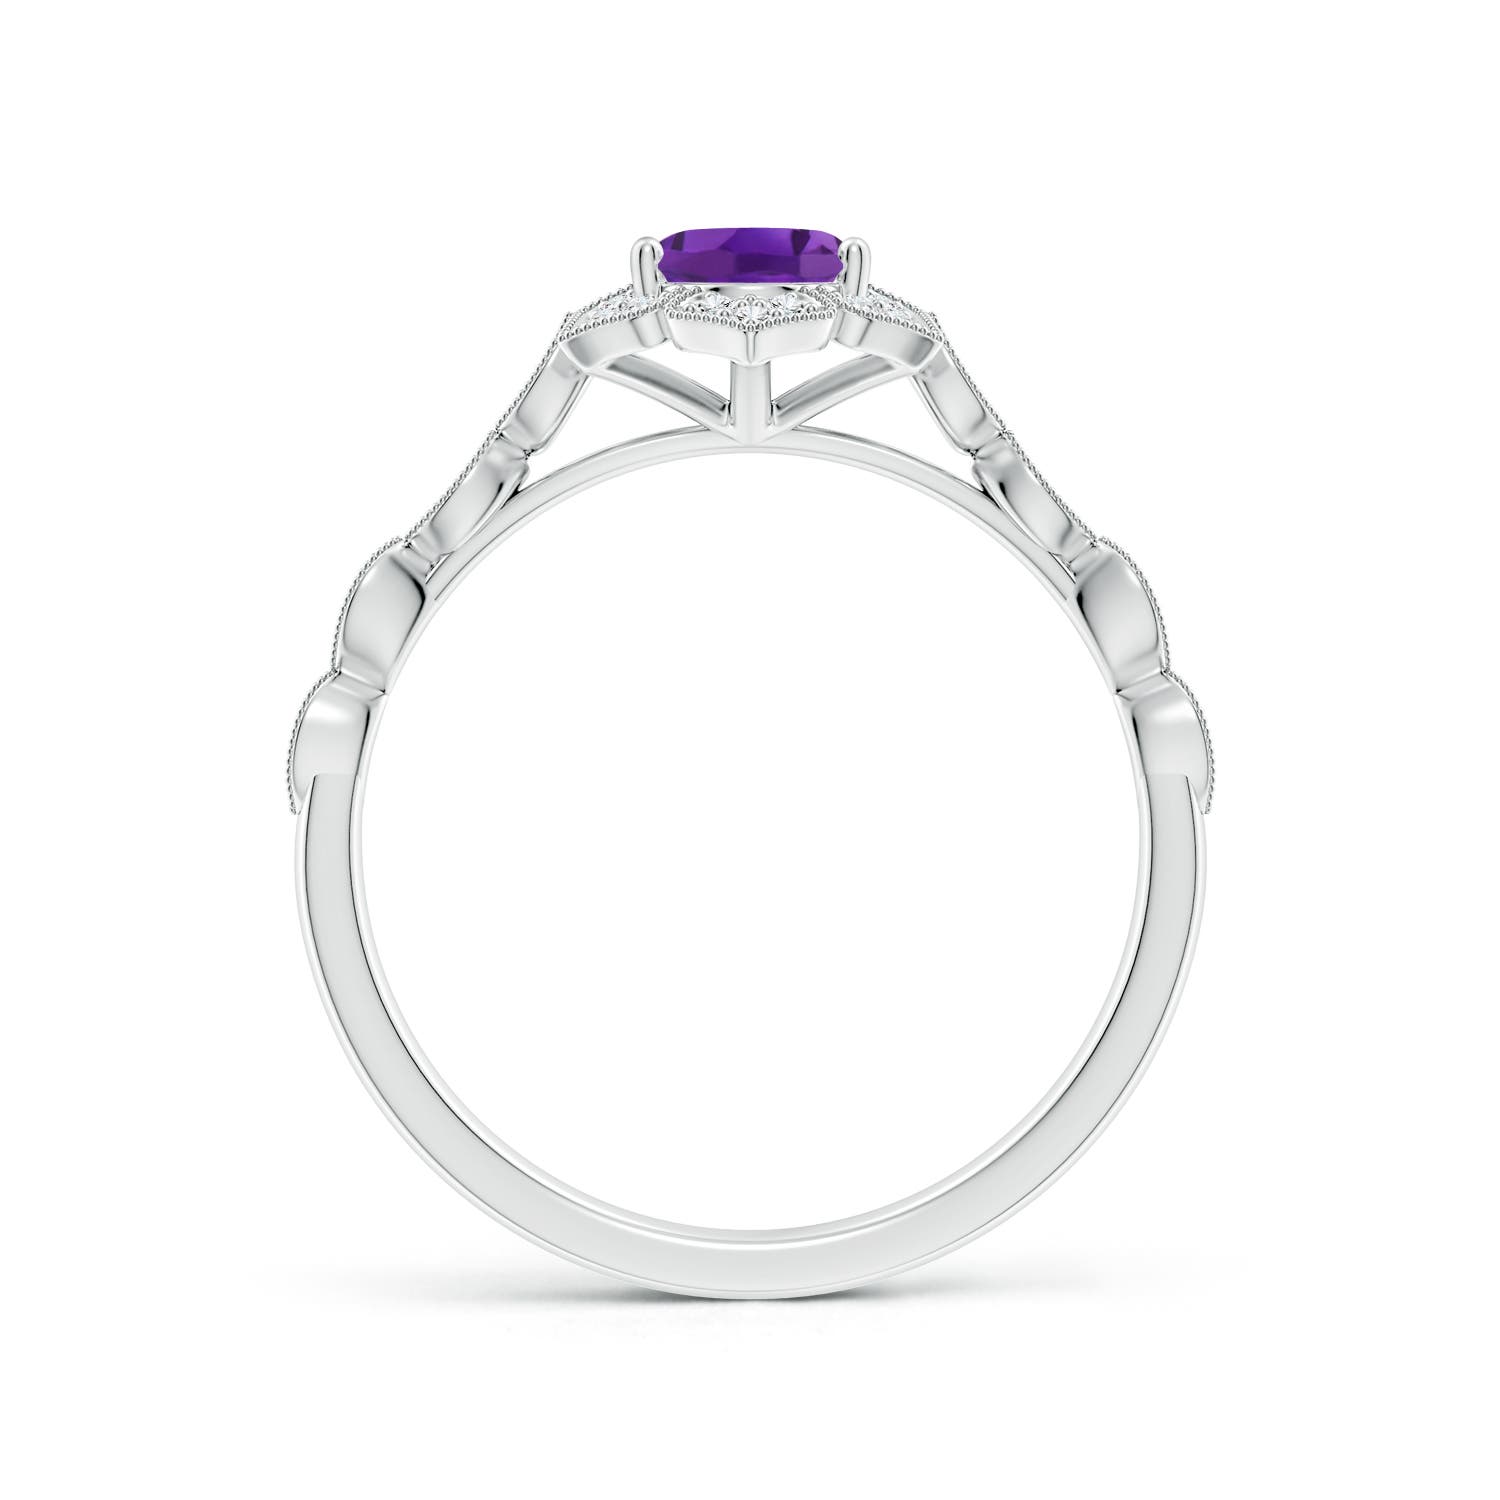 AAA - Amethyst / 0.84 CT / 14 KT White Gold